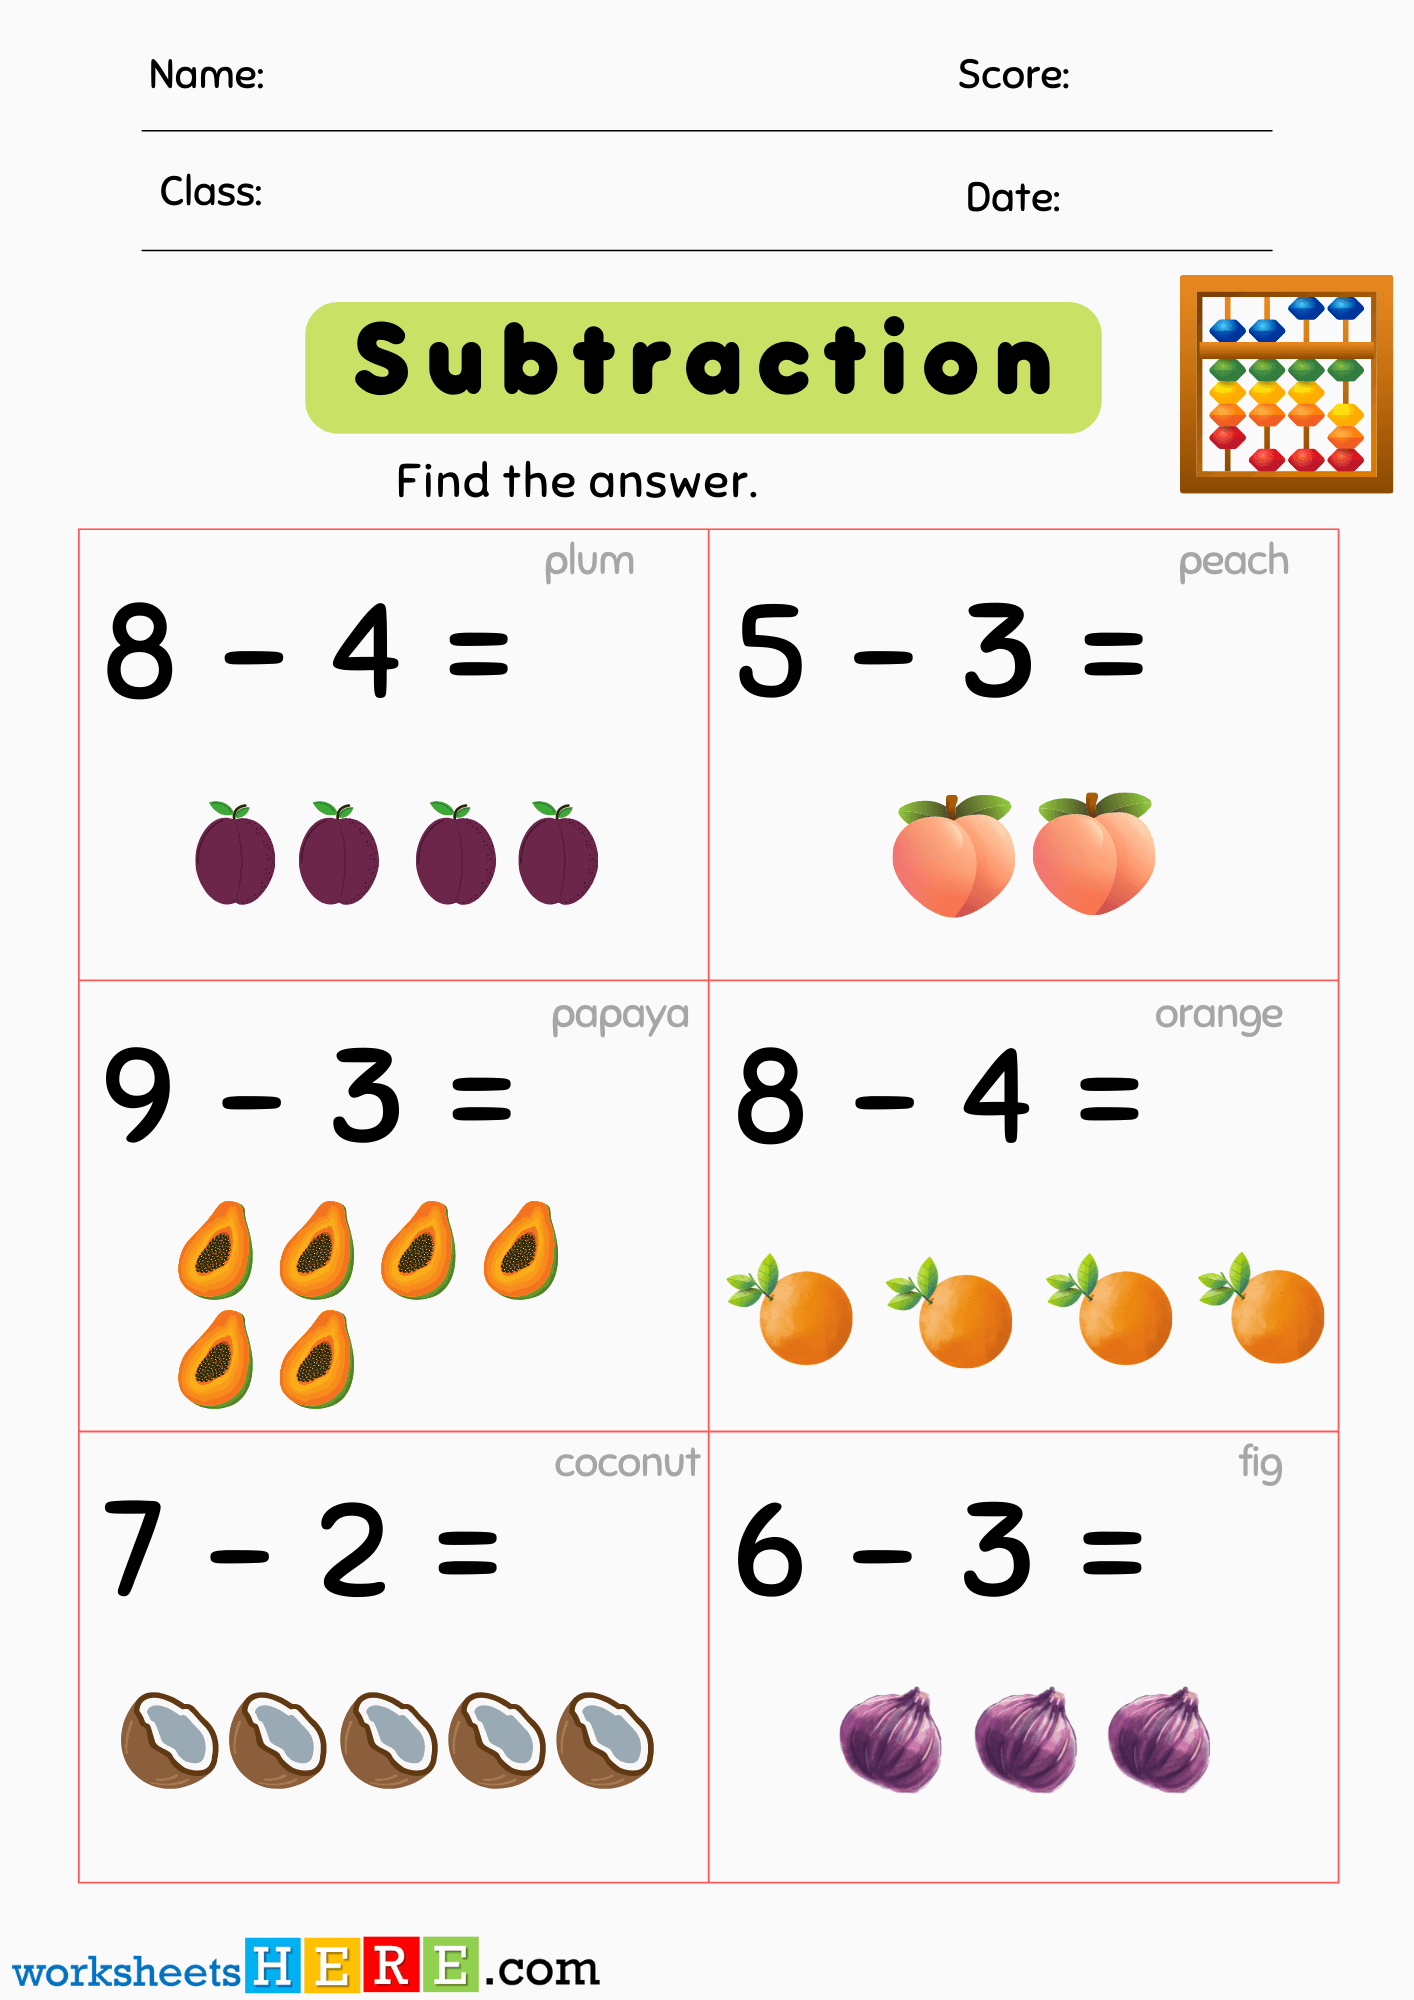 Subtraction Exercises with Fruits Printable PDF Worksheet For Students